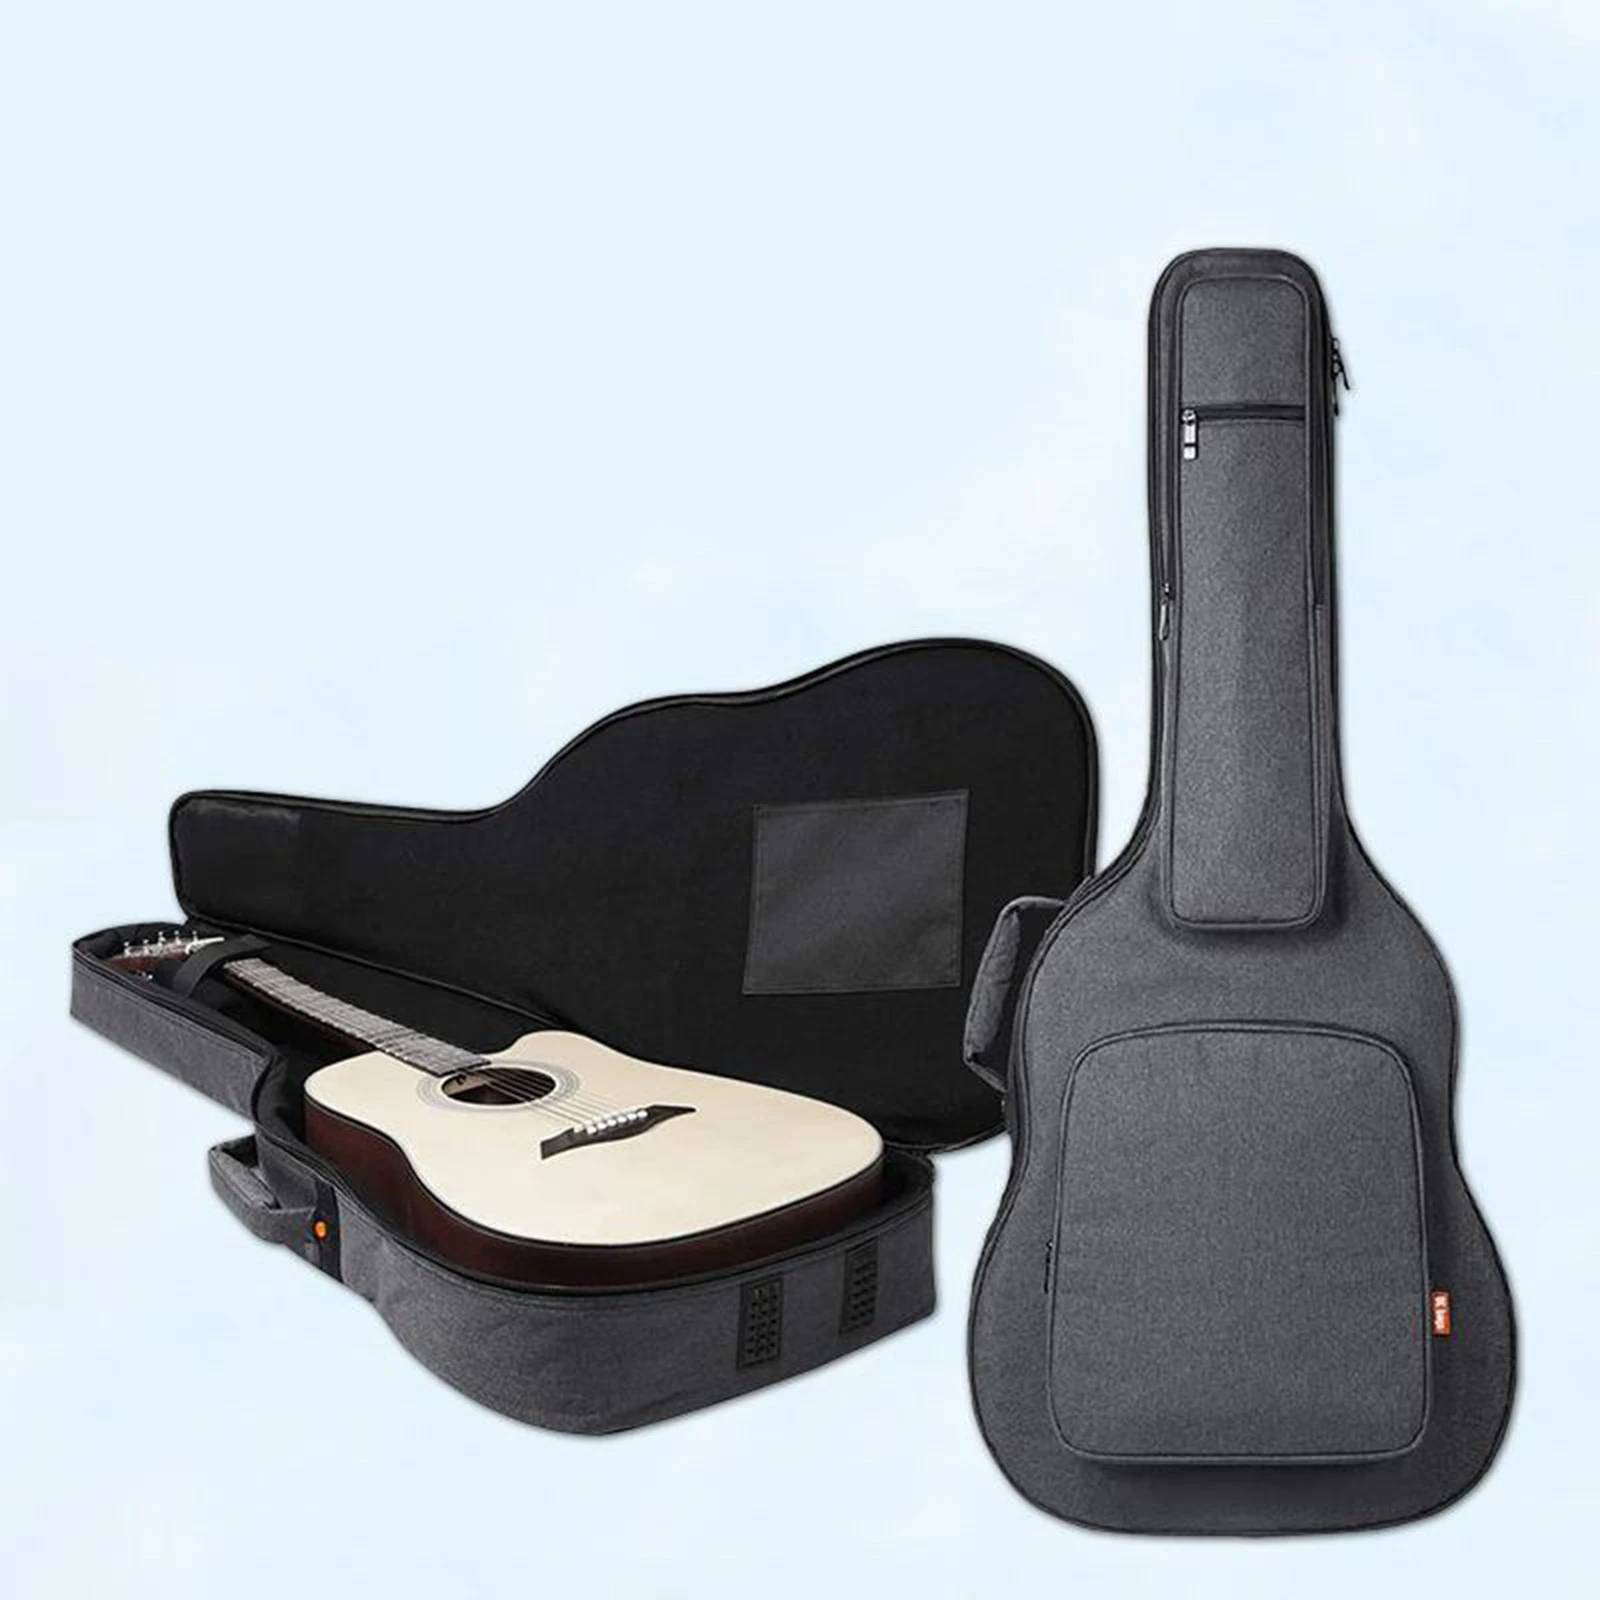 41 inch Electric Guitar Bag Waterproof Dustproof Soft Case for Home Storage